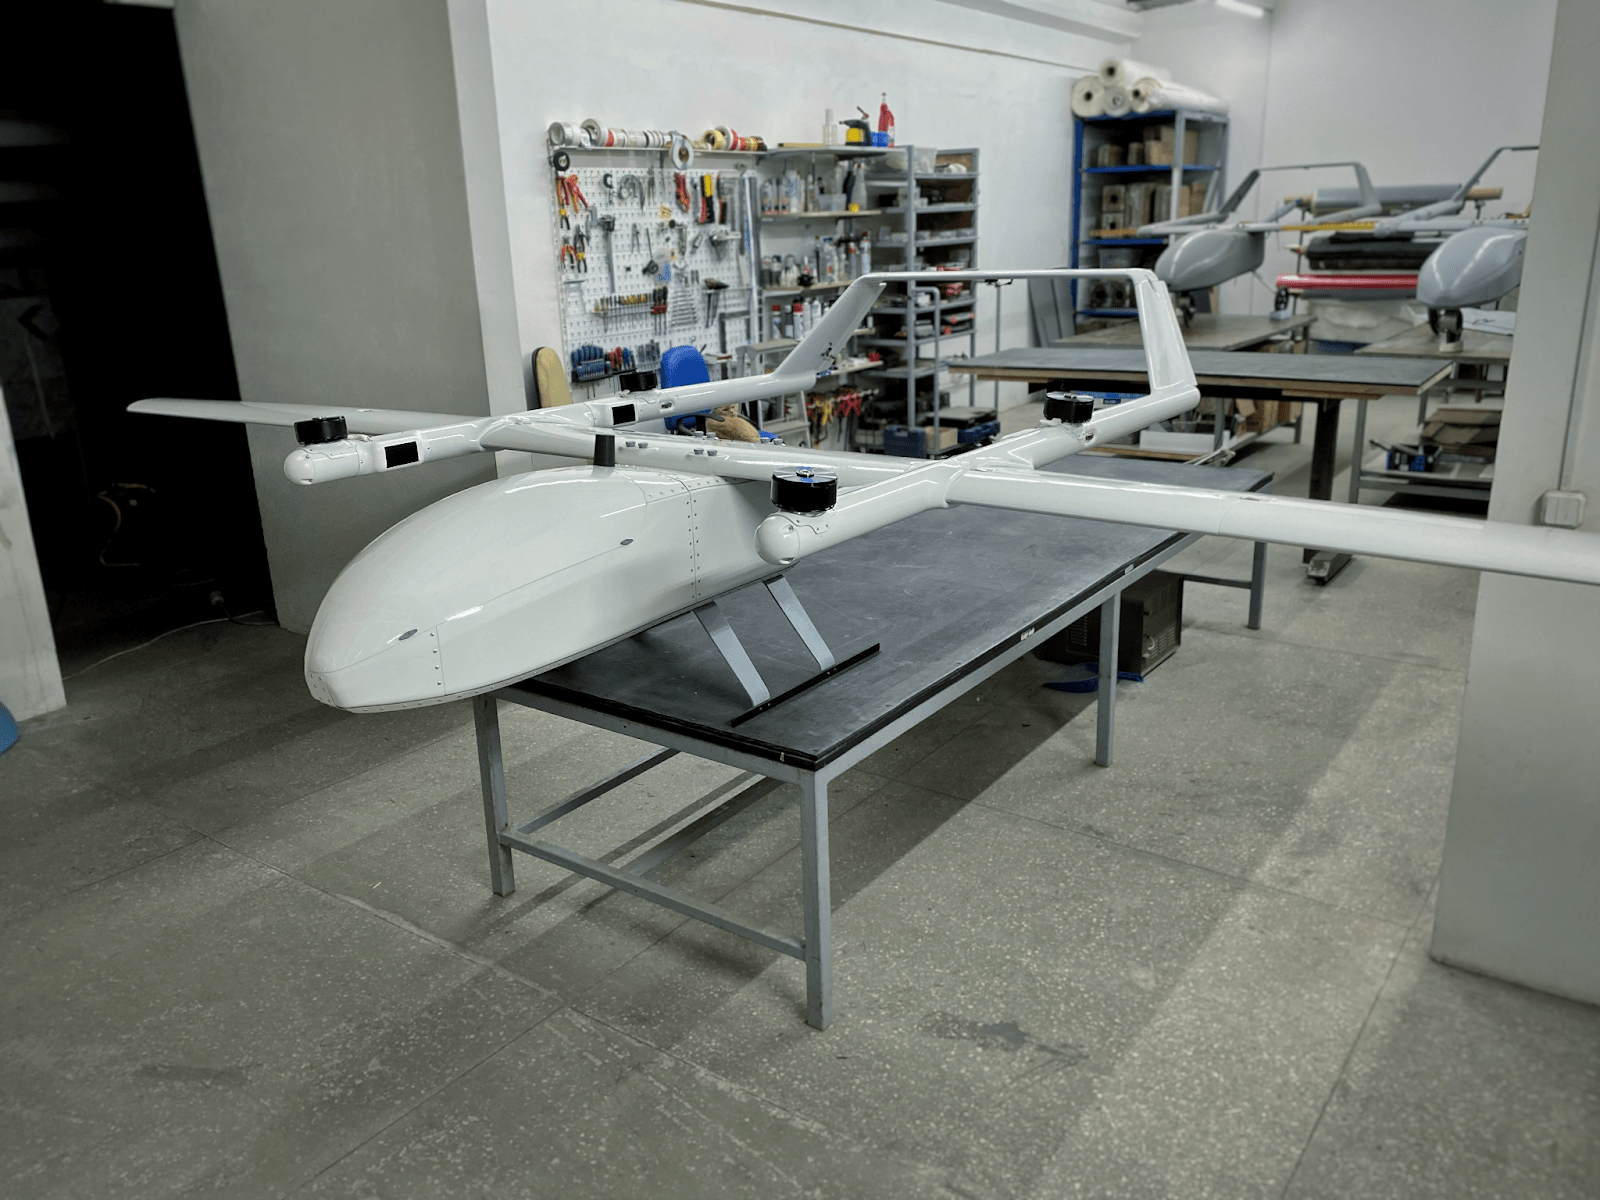 Birth of our hybrid VTOL fixed-wing Drone